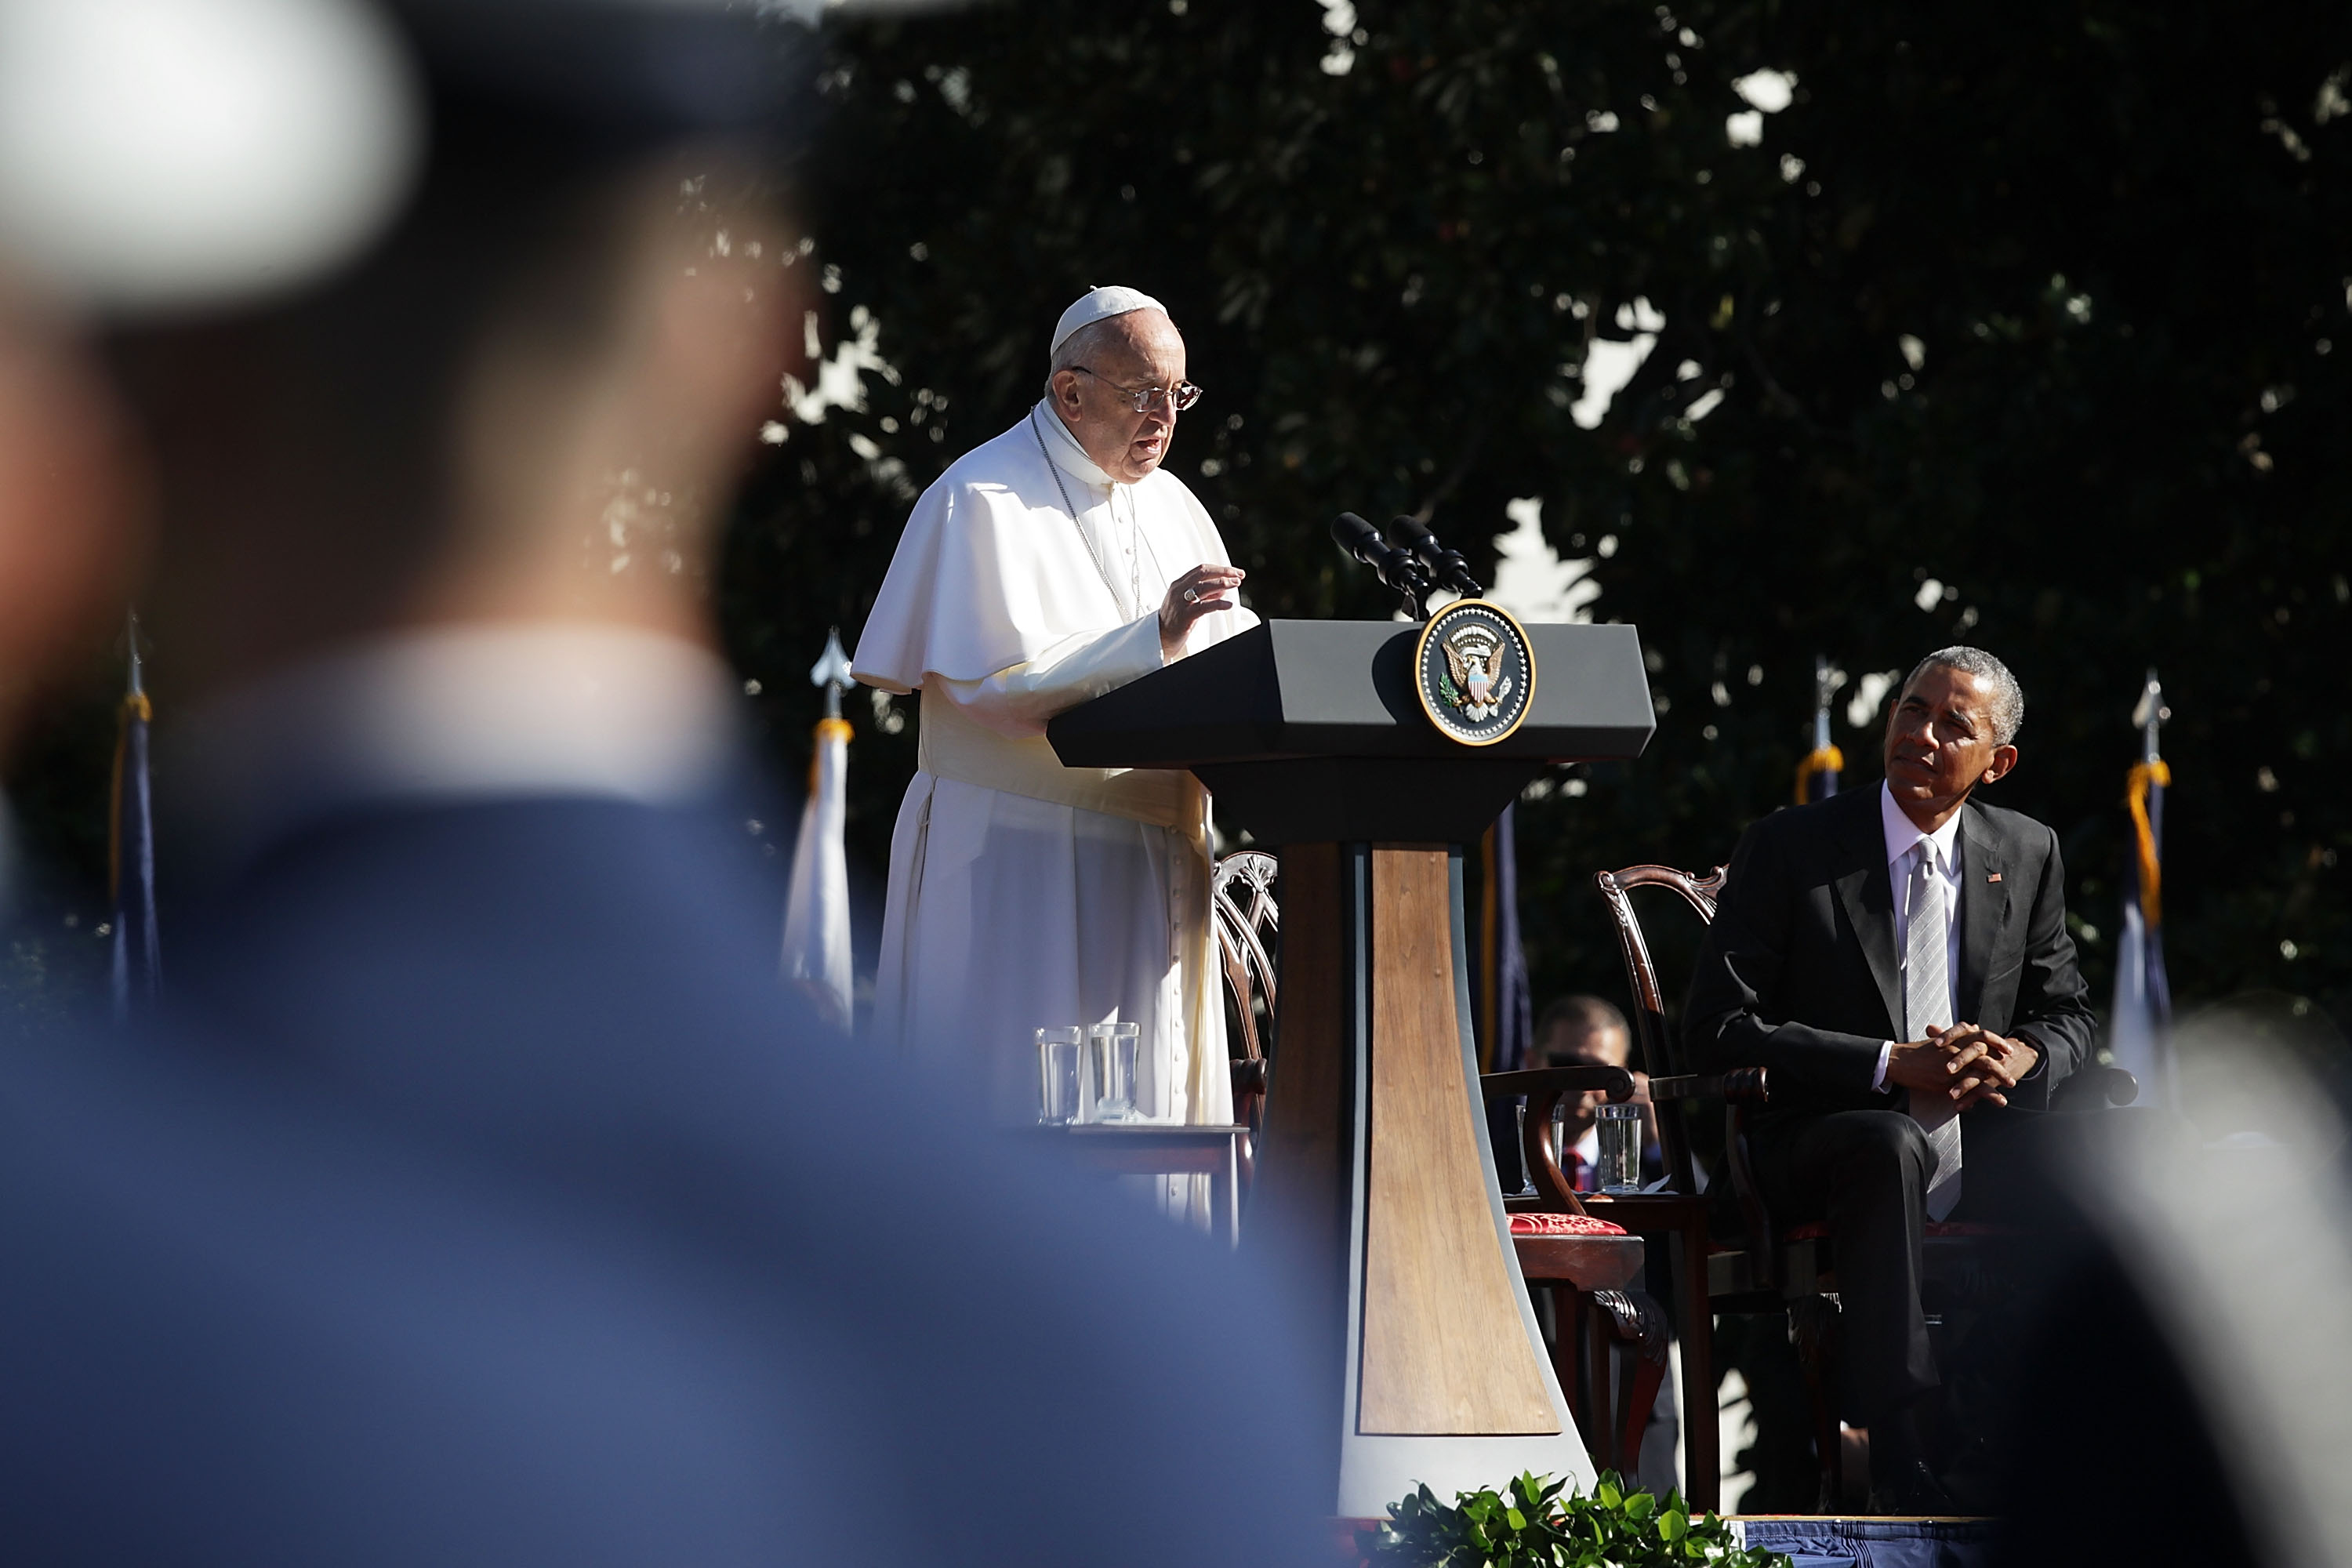 Pope Francis speaks as U.S. President Barack Obama listens during the arrival ceremony at the White House on September 23, 2015 in Washington, DC. The Pope began his first trip to the United States at the White House. (Photo by Alex Wong/Getty Images)